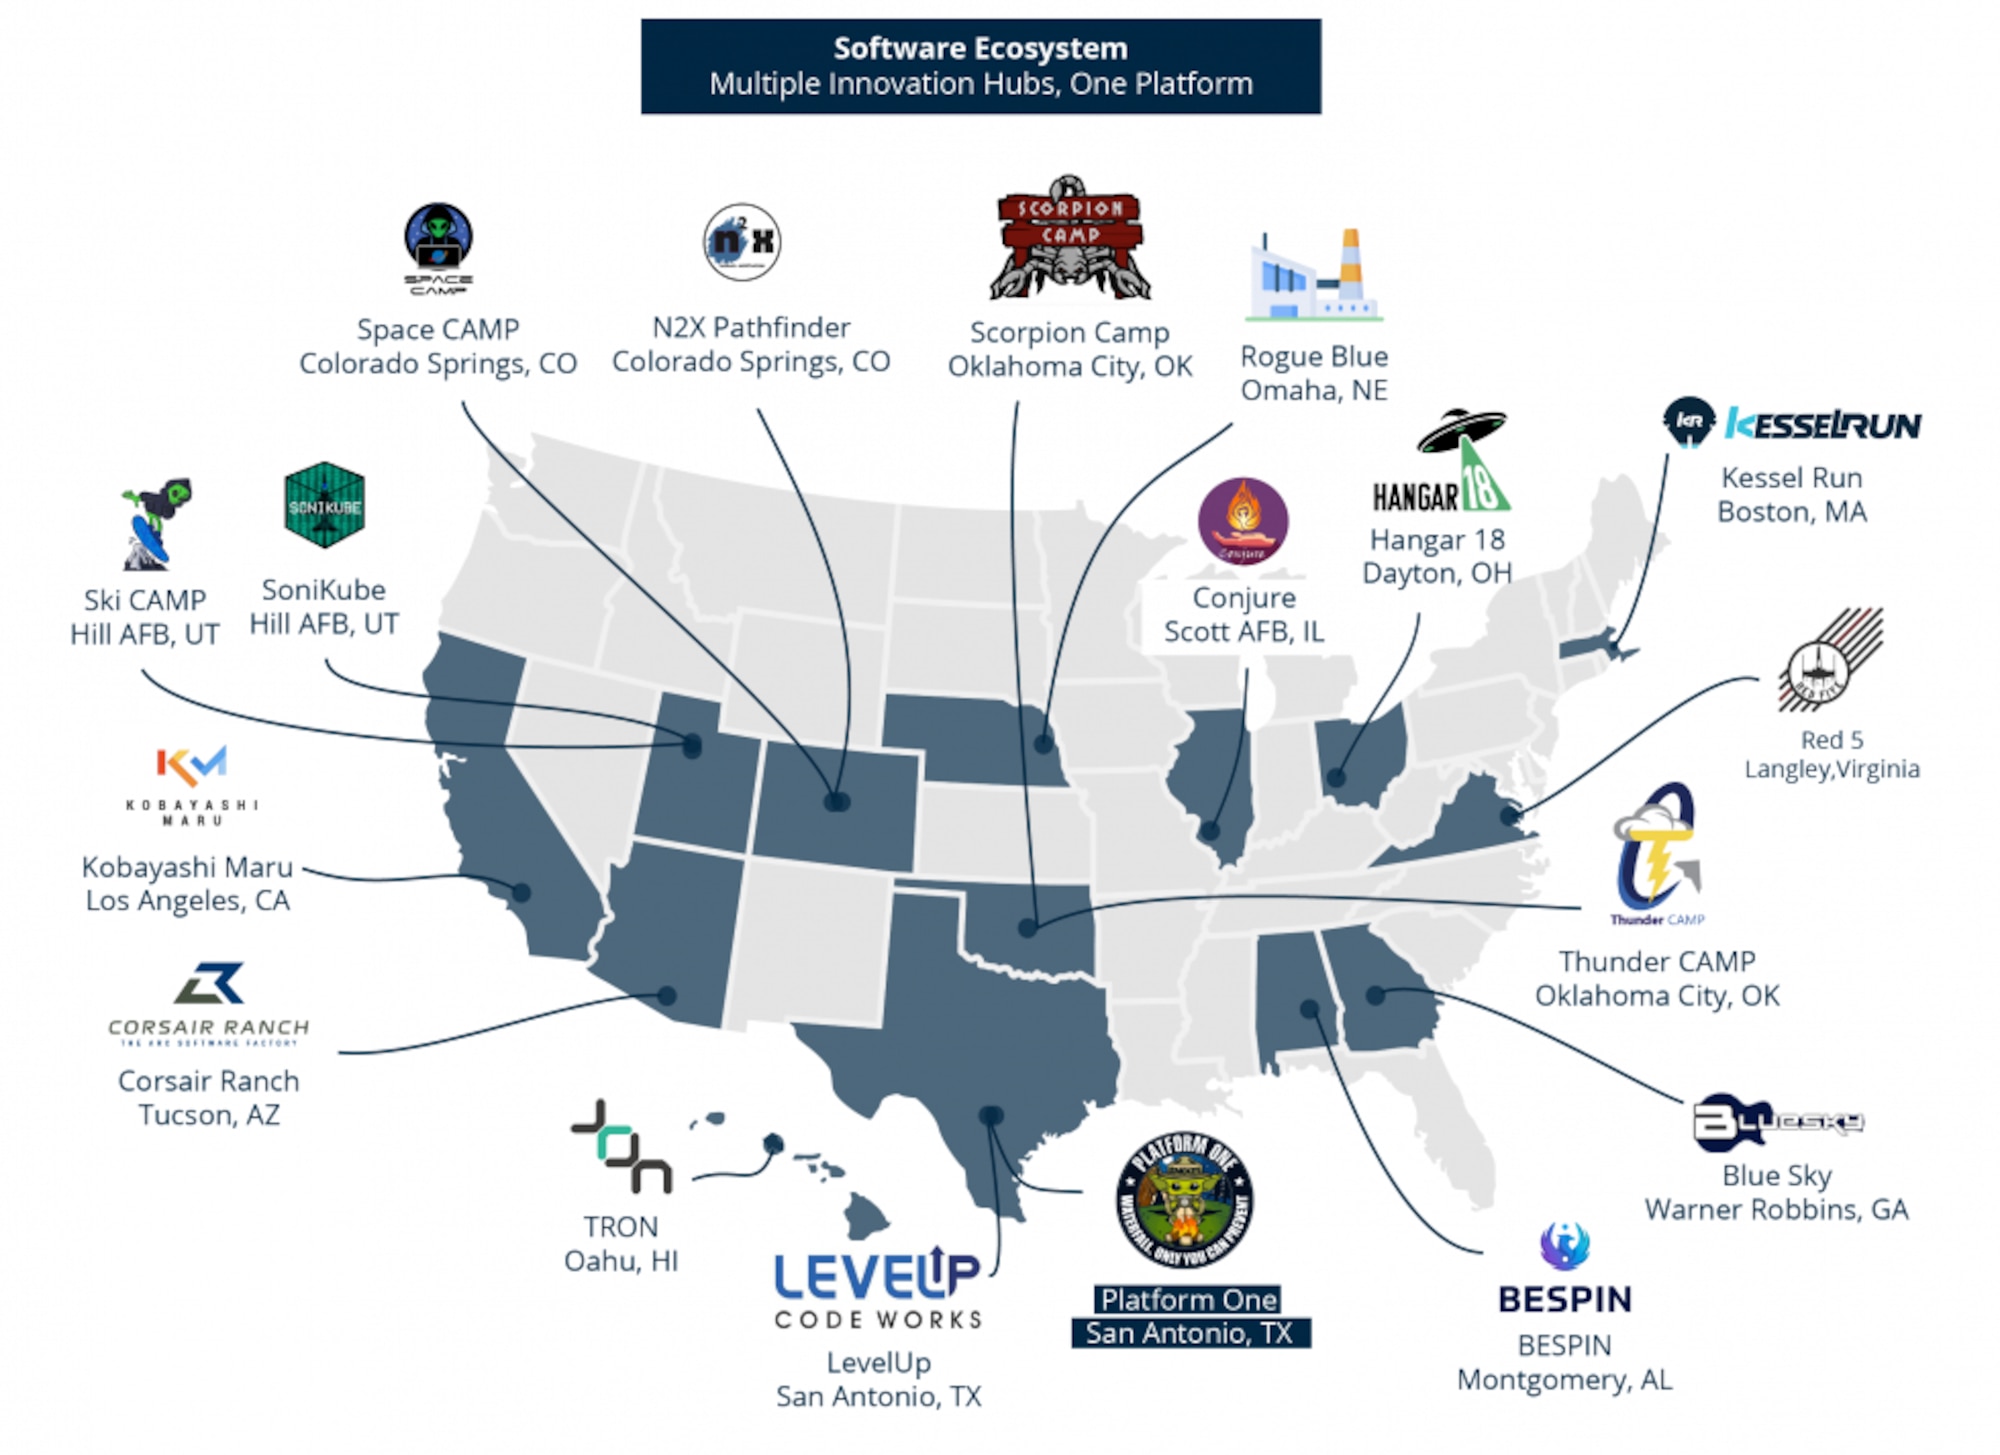 The Department of the Air Force now boasts a software ecosystem of 17 innovation hubs and software factories under one platform across the United States. (Courtesy Illustration)